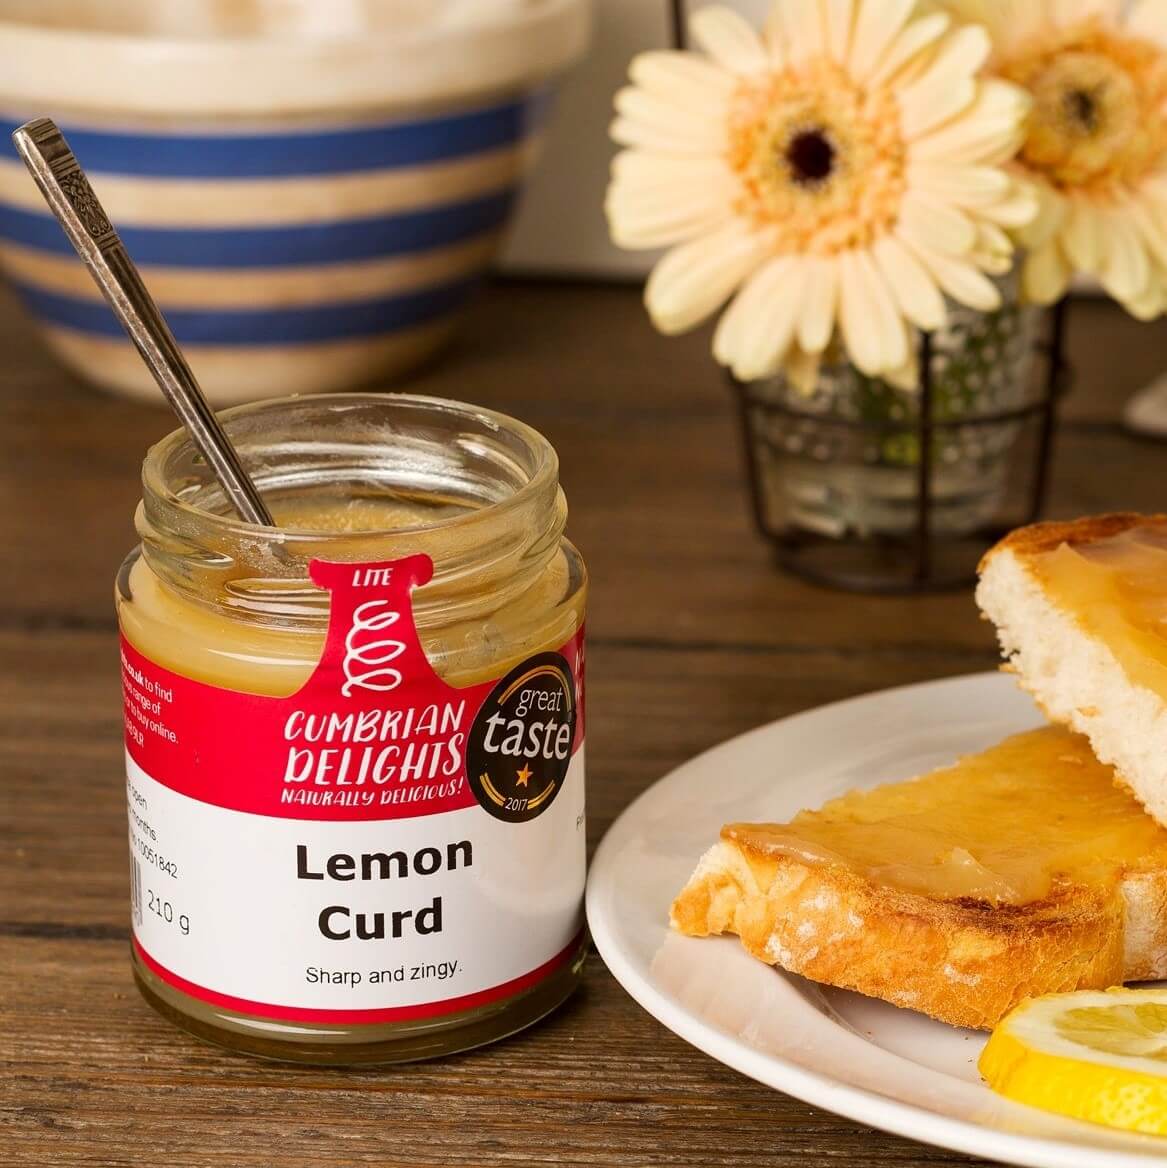 Image of Lemon Curd by Cumbrian Delights, designed, produced or made in the UK. Buying this product supports a UK business, jobs and the local community.